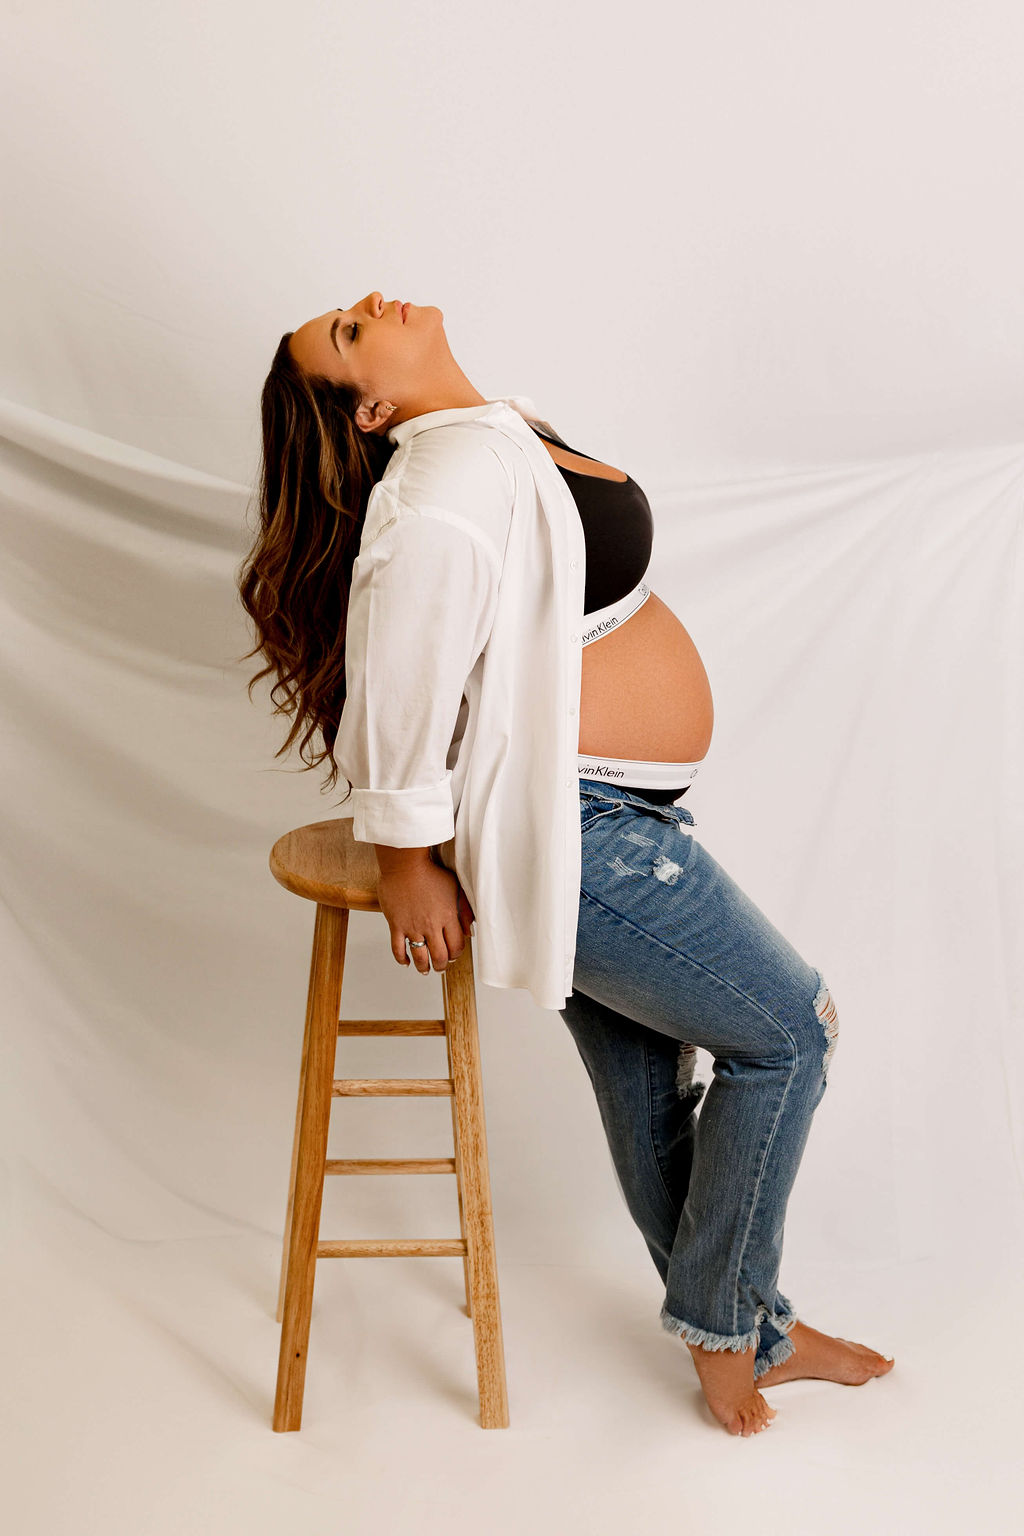 A mom to be in jeans and an unbuttoned shirt leans back on a wooden stool in a studio thanks to new life birth services